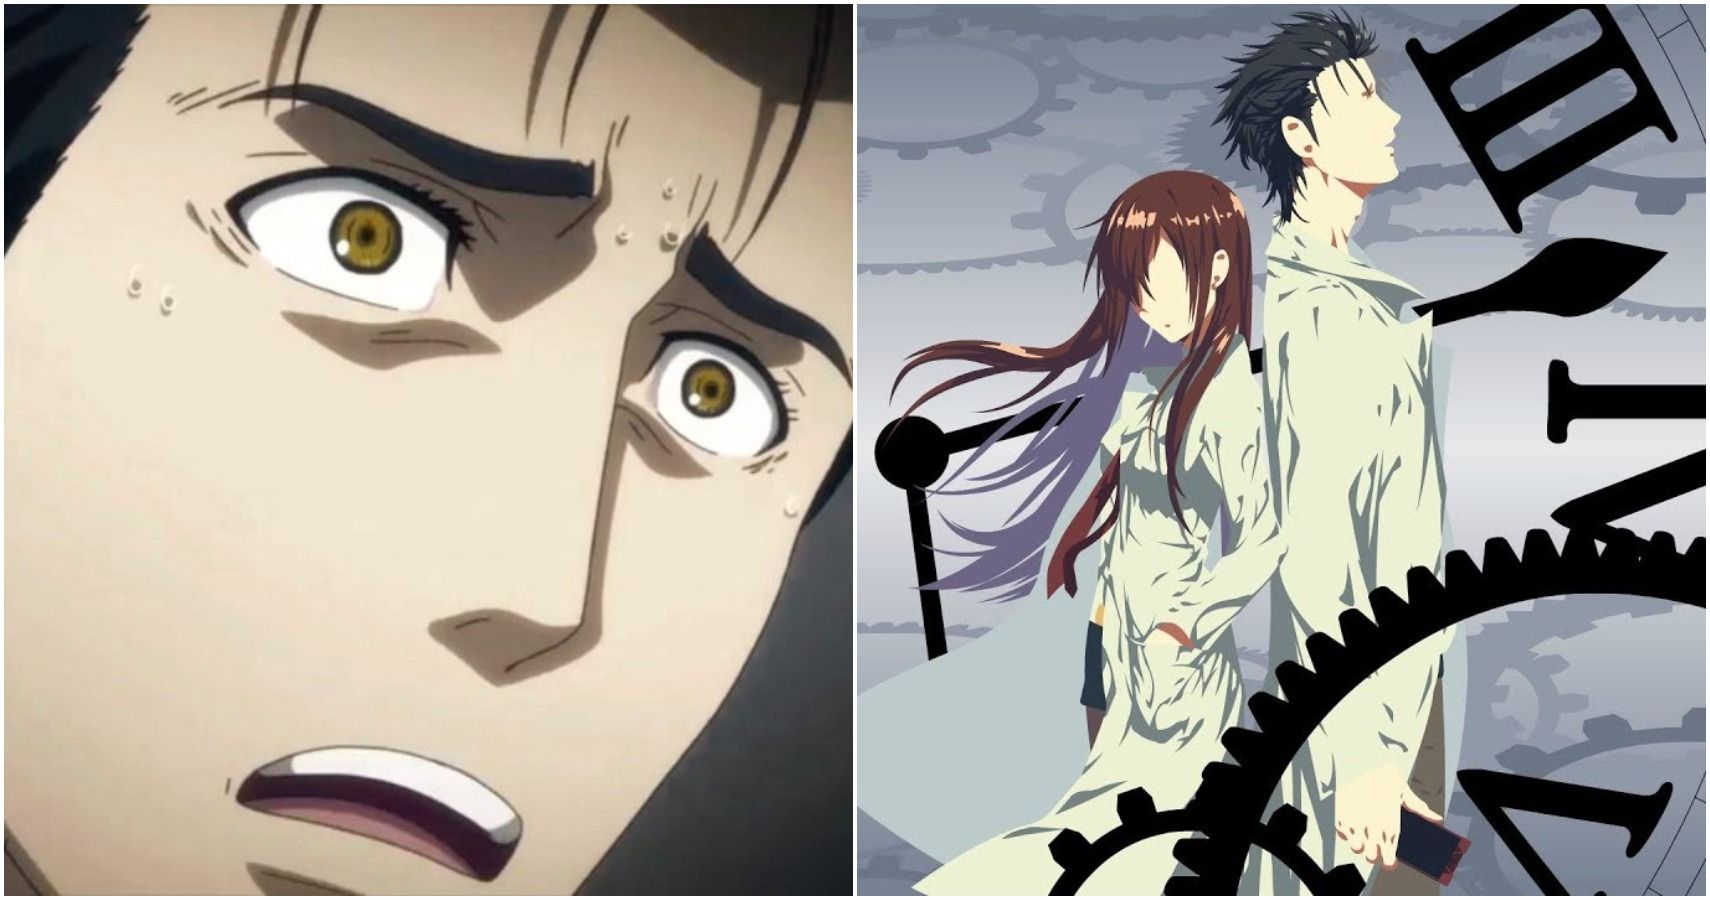 Steins;Gate Series Characters - Giant Bomb